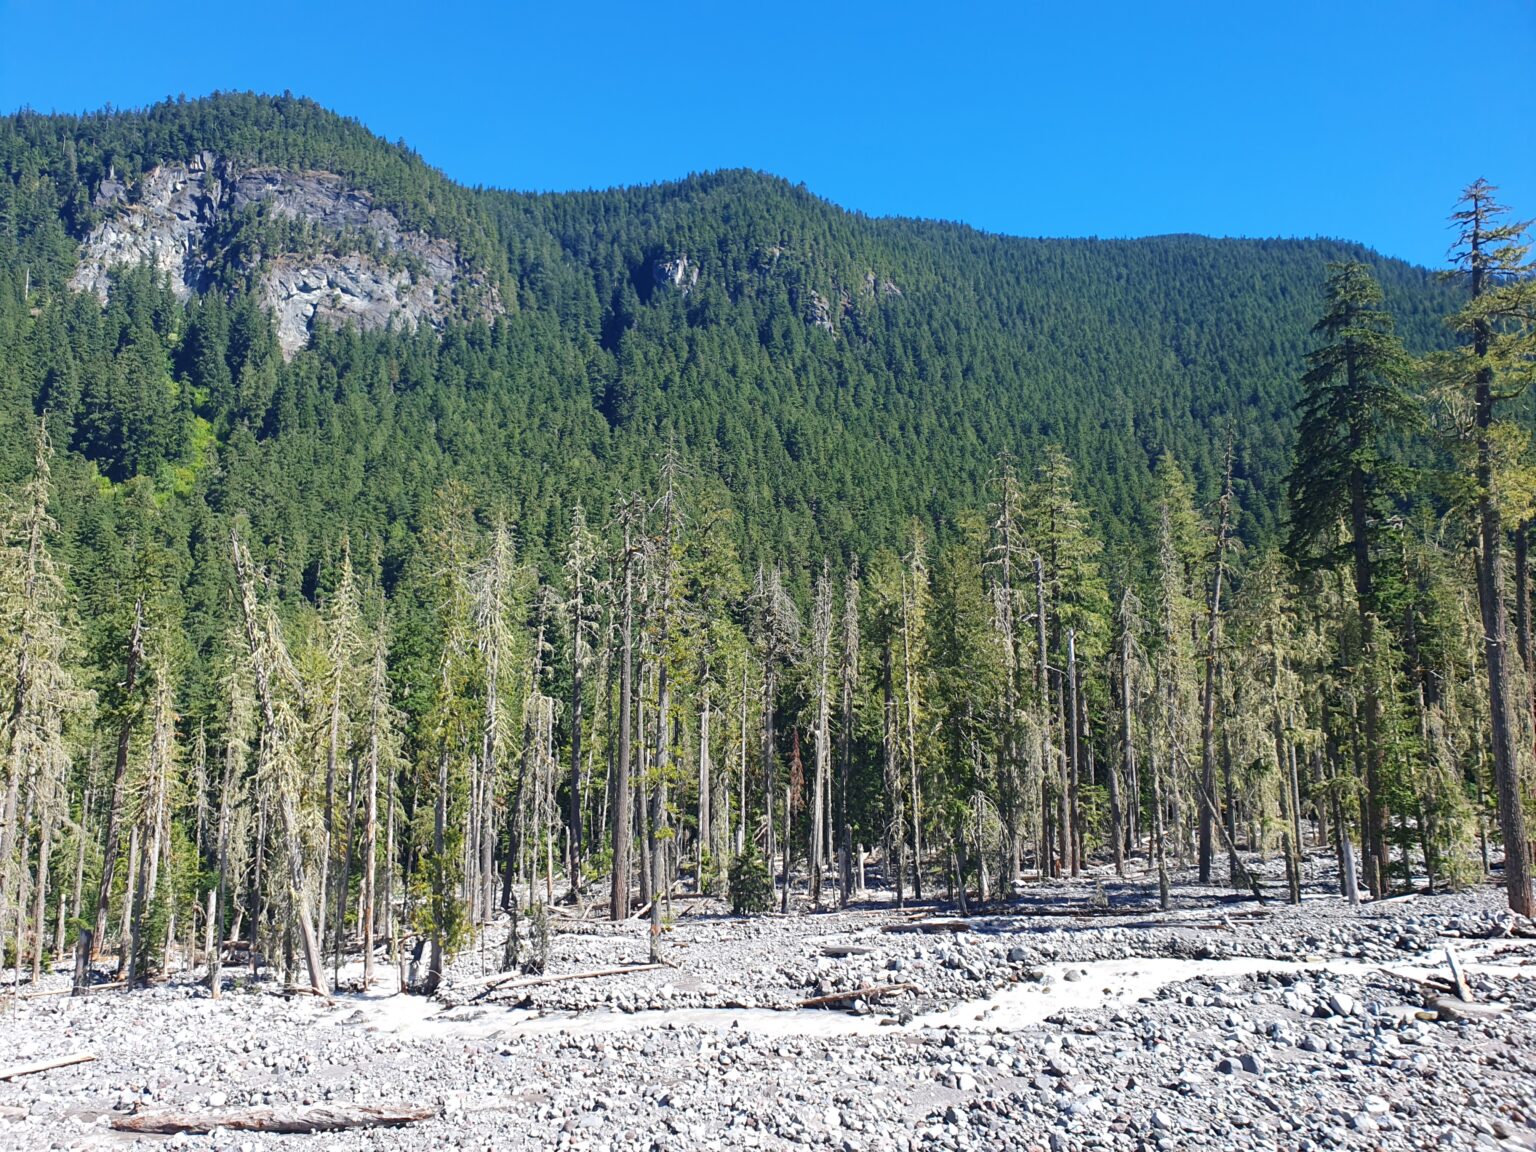 Hiking up the Carbon River Valley